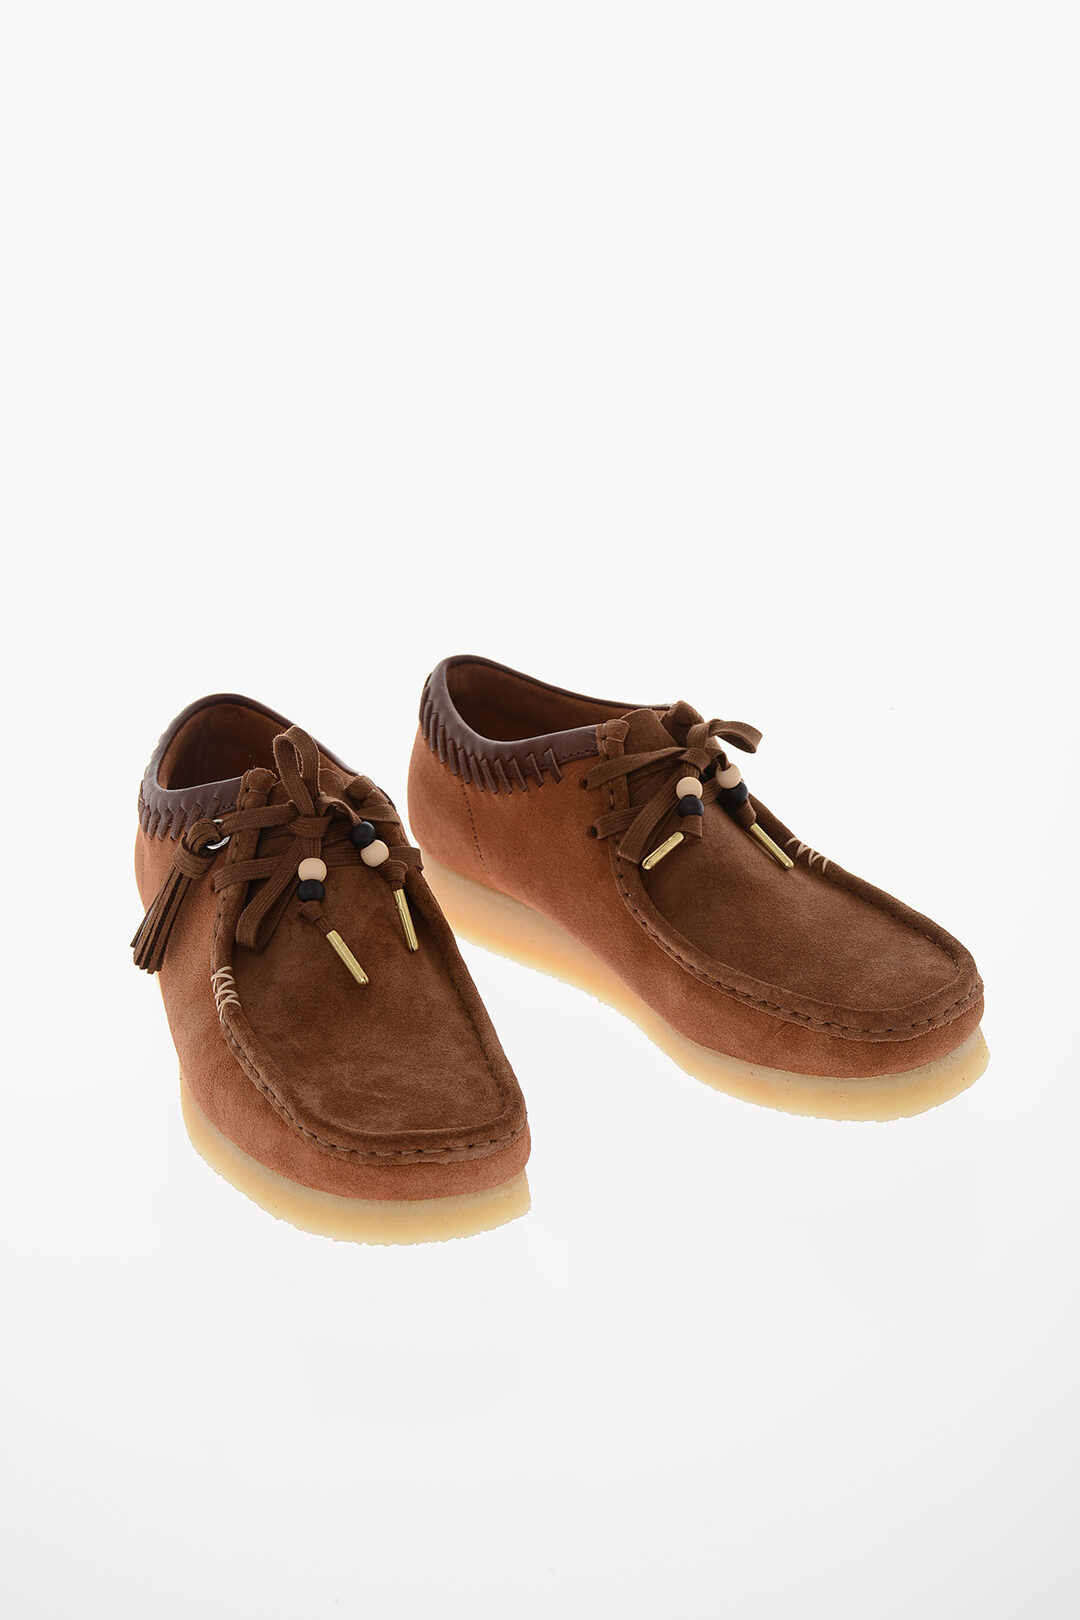 Clarks WALLABEE Desert with Crepe Sole men - Glamood Outlet